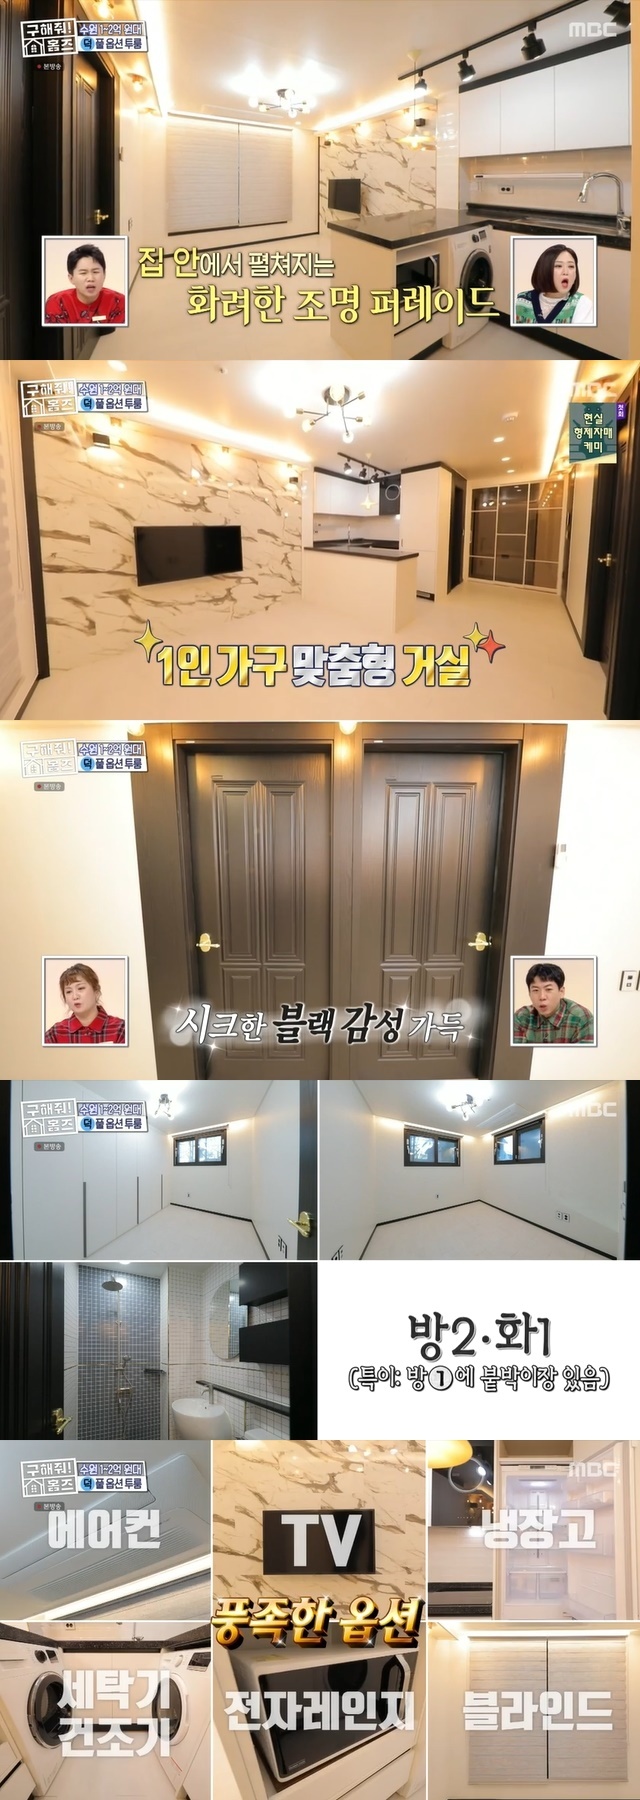 Park Na-rae, Yang Se-hyeong, Park Young-jin and Jang Dong-min won the publicity penalty for other broadcasts Homes.MBC entertainment Where is My Home (hereinafter referred to as Homes), which was broadcast on January 2, featured a single-person household The Client who visited a house within 30 minutes to the Yong-In amusement park, an office worker.The desired area was Yong-In, Suwon, Gyeonggi Province, and wanted a house with many basic options and sensual interiors. The budget was up to 200 million won.Duck Team Cody, Hannyeon, Boom introduced a new sale in Uman-dong, Paldal-gu, Suwon, 20 minutes to the Clients workplace.There was a university 10 minutes walk away from the city-style living house, so I was able to enjoy the university infrastructure.The interior was admirable with a clean white tone and bright and bright lighting.In contrast to these white interiors, the color of the door, the window frame, and the lighting were decorated with point black, and Boom named the house Moon in Black House, saying, It is like the waiting room of a Broadway actor.The basic options were system air conditioners, and in the kitchen, washing machines, dryers, refrigerators, and inductions were basic options.The room was a guest room or a built-in room for a dress room, and a room with a sufficient bed. Finally, the bathroom was a clean room with a shower space.The rent was 230 million won.On the other hand, Park Na-rae suddenly attracted attention by shouting the title of TVN drama Bad and Crazy starring actor Lee Dong-wook and Wi Ha-joon during the introduction of the sale.Park Na-rae confessed to the coordinators who demanded explanation with a puzzled expression that it was the performance of the bet penalty that was taken at the TVN entertainment Amazing Saturday Doremi Market.On the spot, Jang Dong-min suggested Lets ask and go to double and Homes coordinators also challenge the bet.The team that is defeated in this sale show is to shout the full name of Save Me Homes in each other broadcasting station program.Park Na-rae said, So is Running Man possible? Yang Se-chan said, and Yang Se-chan said, Running Man is somehow possible.I can do it, he said, accepting the bet.The mission program is Yang Se-hyeong SBS Death of Deacon, Park Na-rae tvN Amazing Saturday Doremi Market, Jang Dong-min Channel A Steel Unit 2, Park Young-jin tvN Comedy Big League, Kim Sook SBS Sangmong 2 - You Are My Destiny, Boom TV Chosun  It was decided to be SBS Running Man.Boom said, How many pros are you promoting? Yang Se-hyeong laughed, I will blow blood if I lose today.Since then, The Clients Choices have been Ducks Moon in Black House.The Client said, It was the best thing to be able to separate the bedroom and the dress room because there were two rooms, and it was felt that it would be easy to clean because it was suitable in size.And I think I can go in only because it is a full option. 